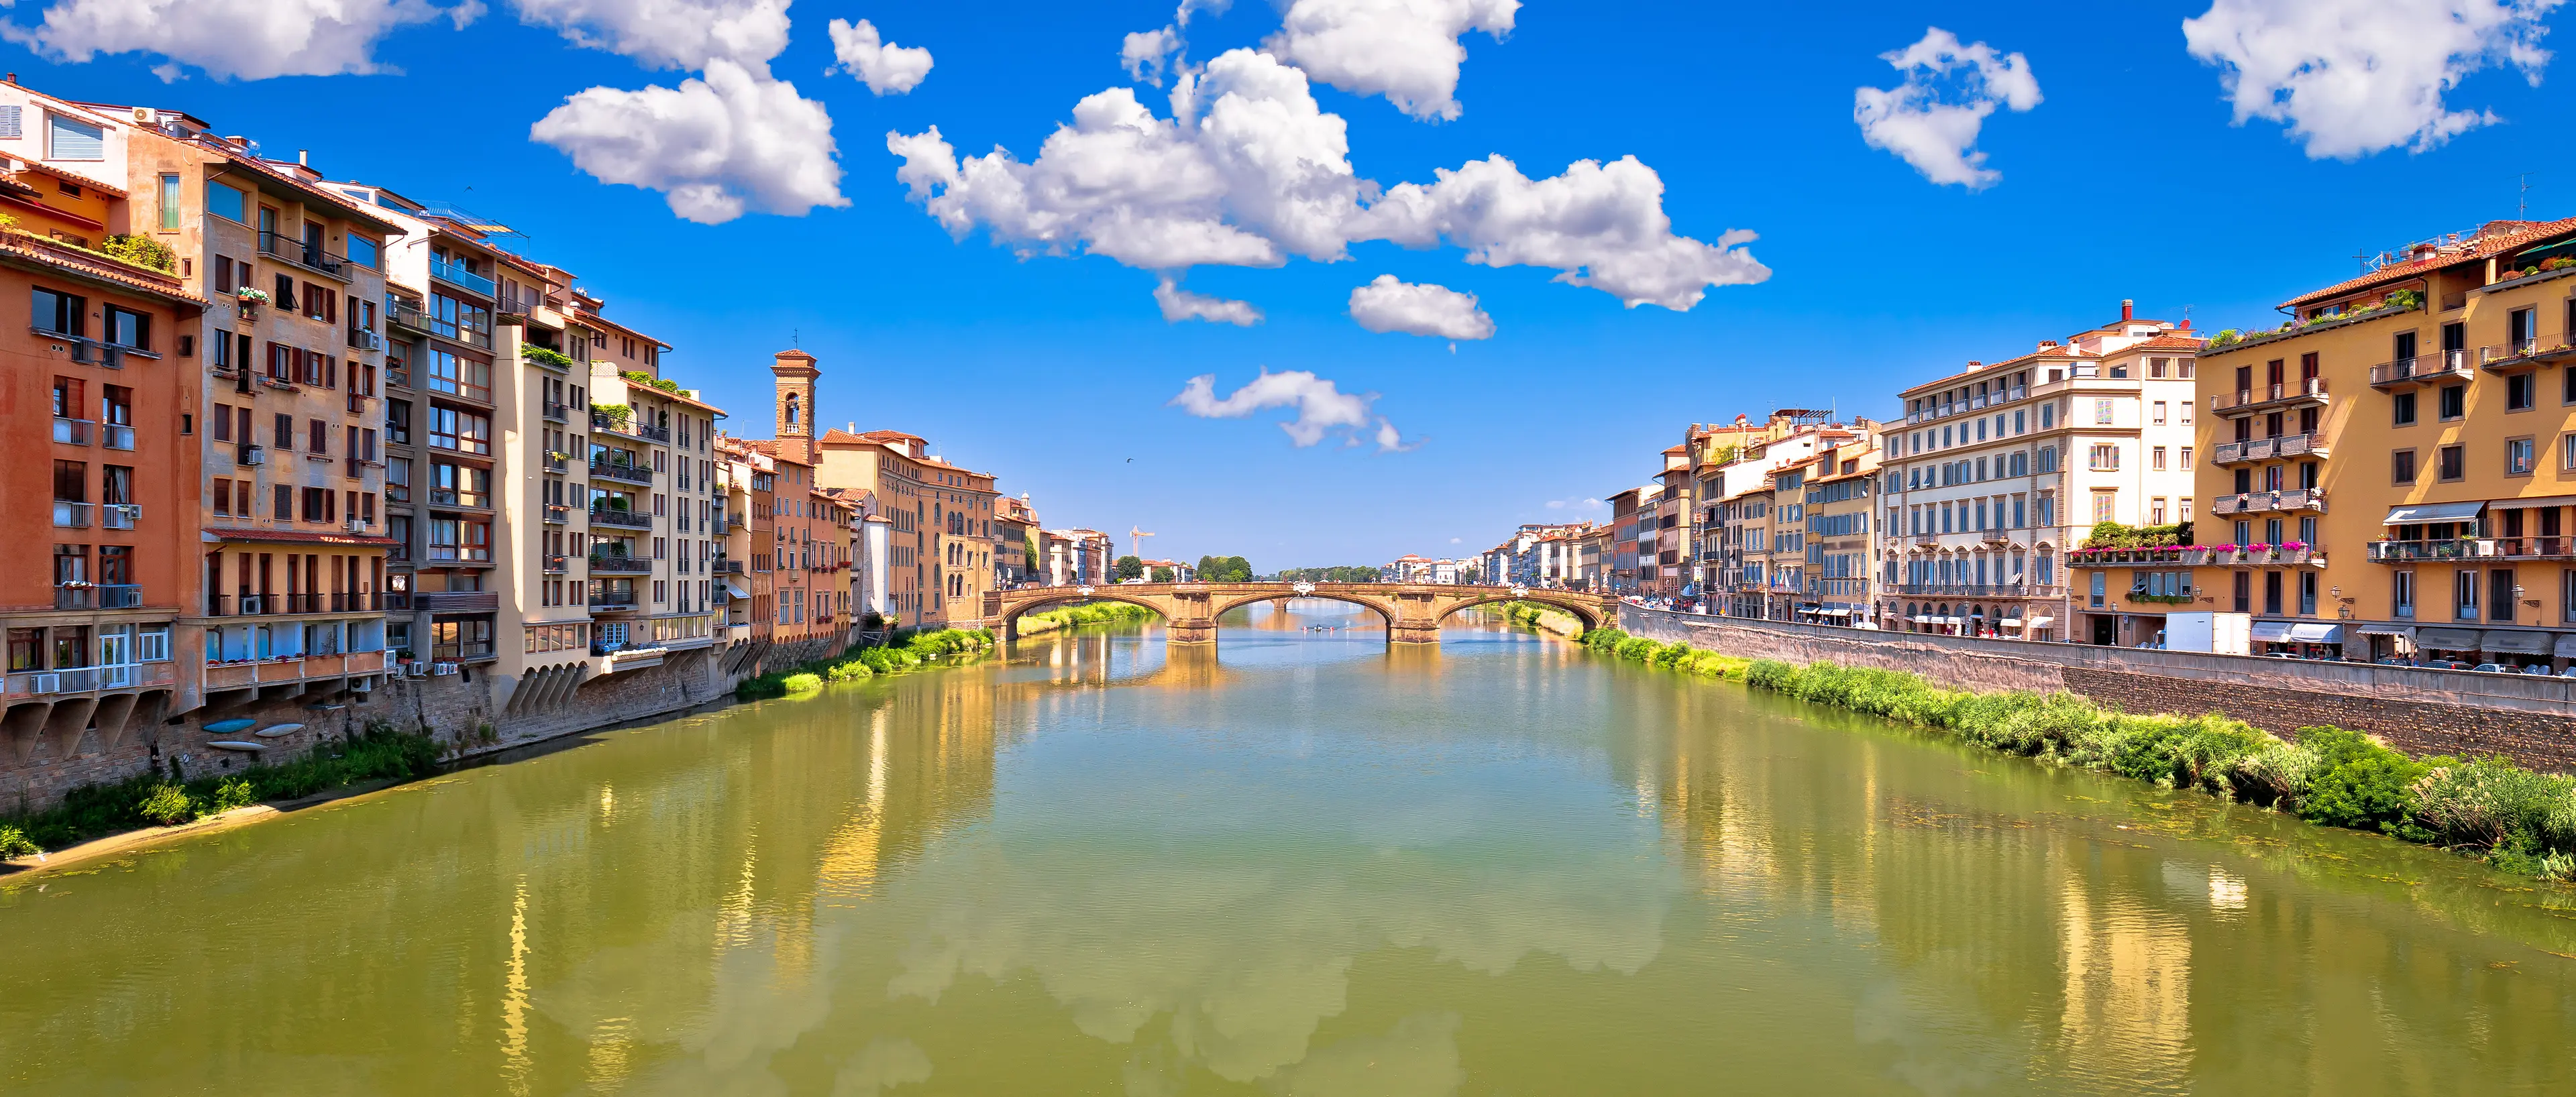 2-Day Solo Food, Wine and Outdoor Adventure in Florence